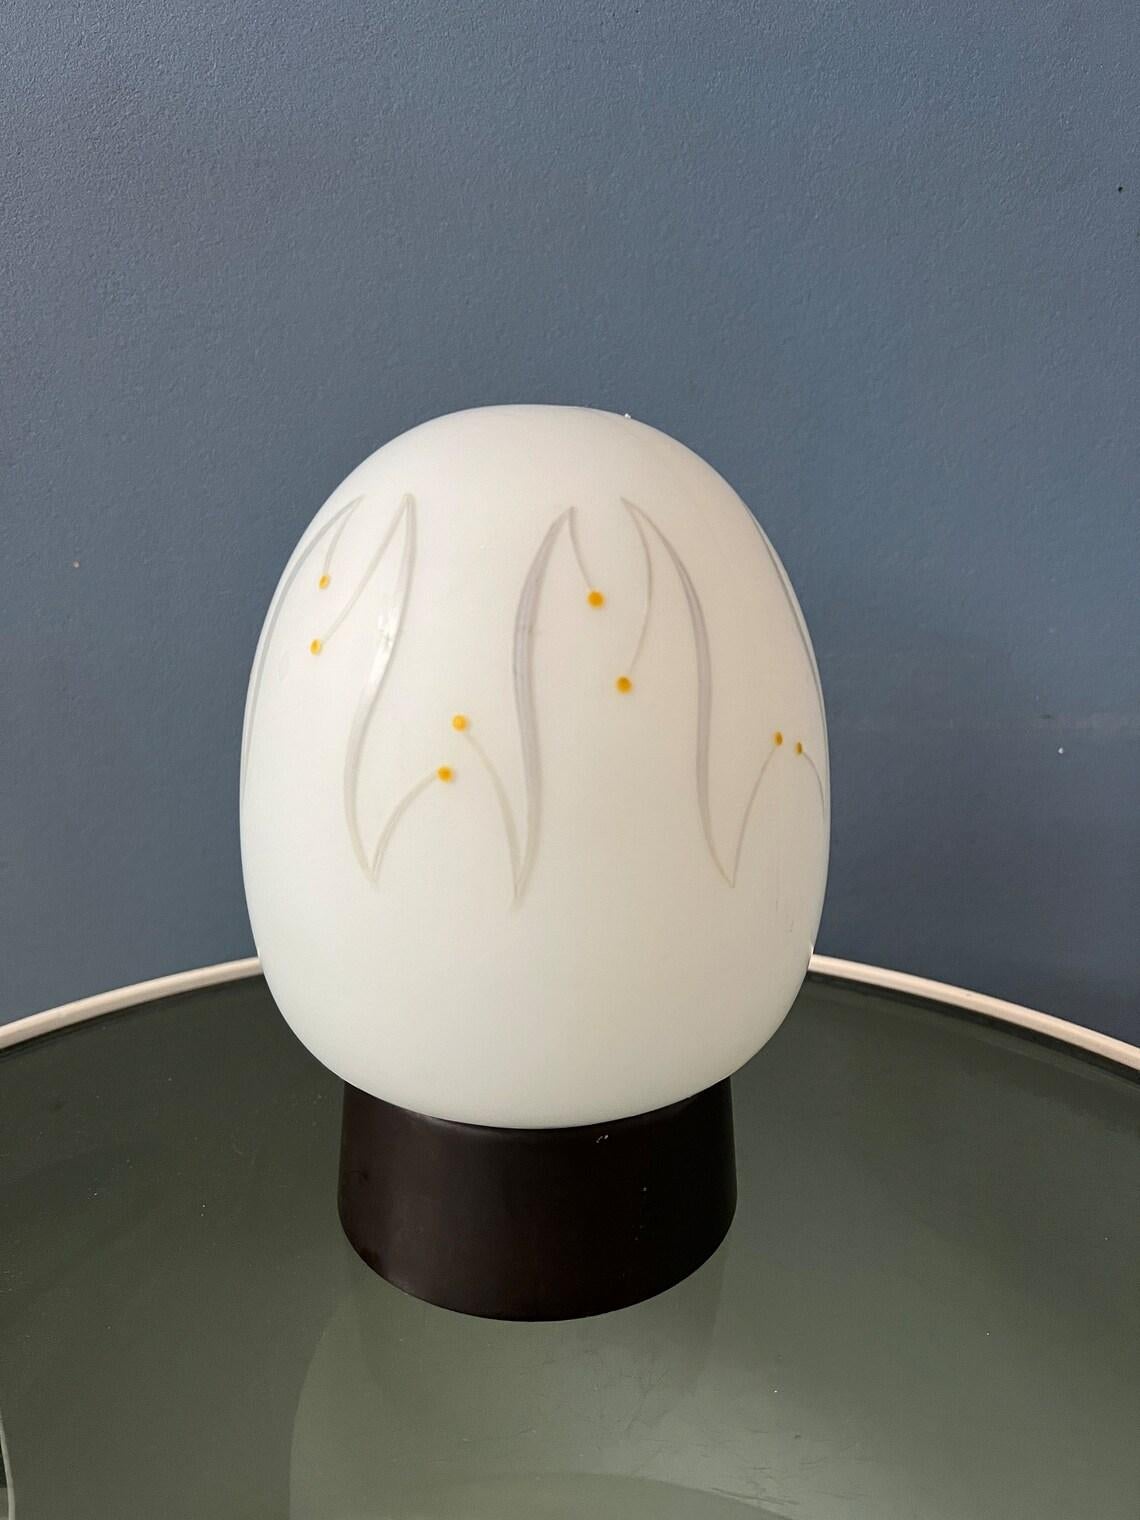 Cute egg-like thabur opaline glass ceiling lamp. The lamp requires an E14 lightbulb.

Additional information:
Materials: Glass, plastic
Period: 1970s
Dimensions:Height: 19 cm
Diameter: 14 cm
Condition: Very good. The lamp is still looking great,